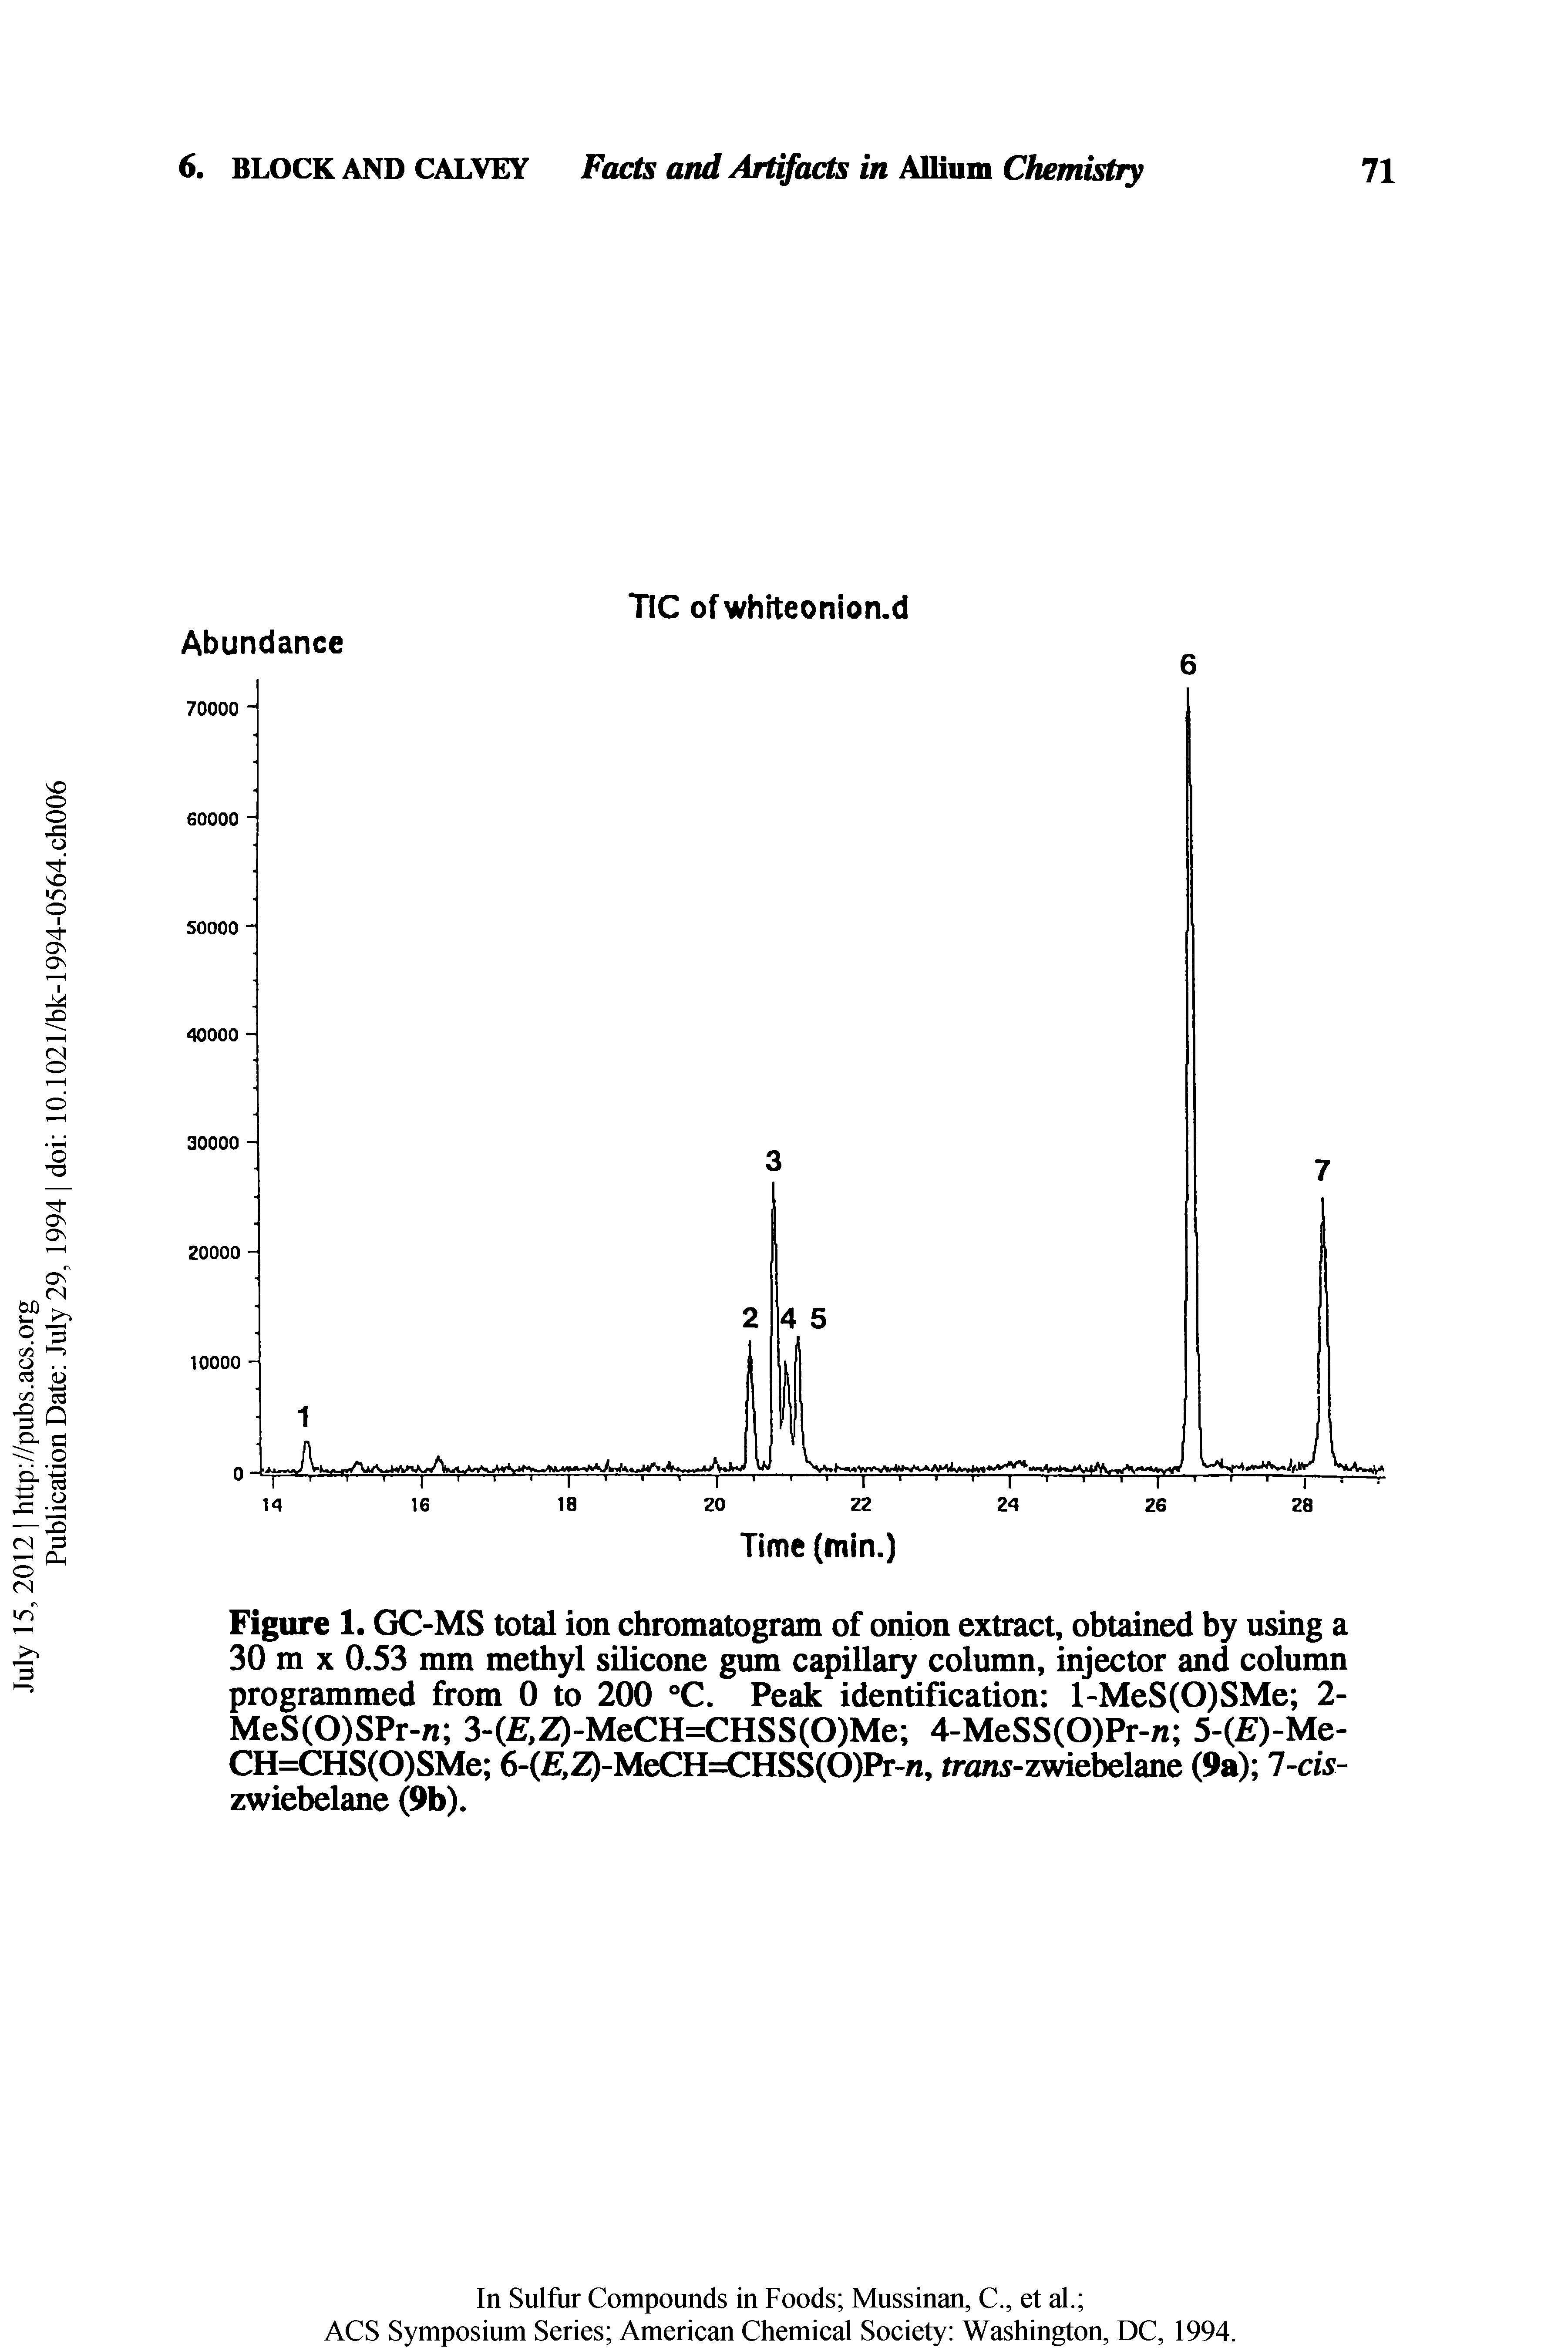 Figure 1. GC-MS total ion chromatogram of onion extract, obtained by using a 30 m X 0.53 mm methyl silicone gum capillary column, injector and column programmed from 0 to 200 °C. Peak identification l-MeS(0)SMe 2-MeS(0)SPr-n 3-(E,Z)-MeCH=CHSS(0)Me 4-MeSS(0)Pr-n 5-( )-Me-CH=CHS(0)SMe 6-( ,Z)-MeCH=CHSS(0)Pr-n, fran -zwiebelane (9a) 1-cis-zwiebelane (9b).